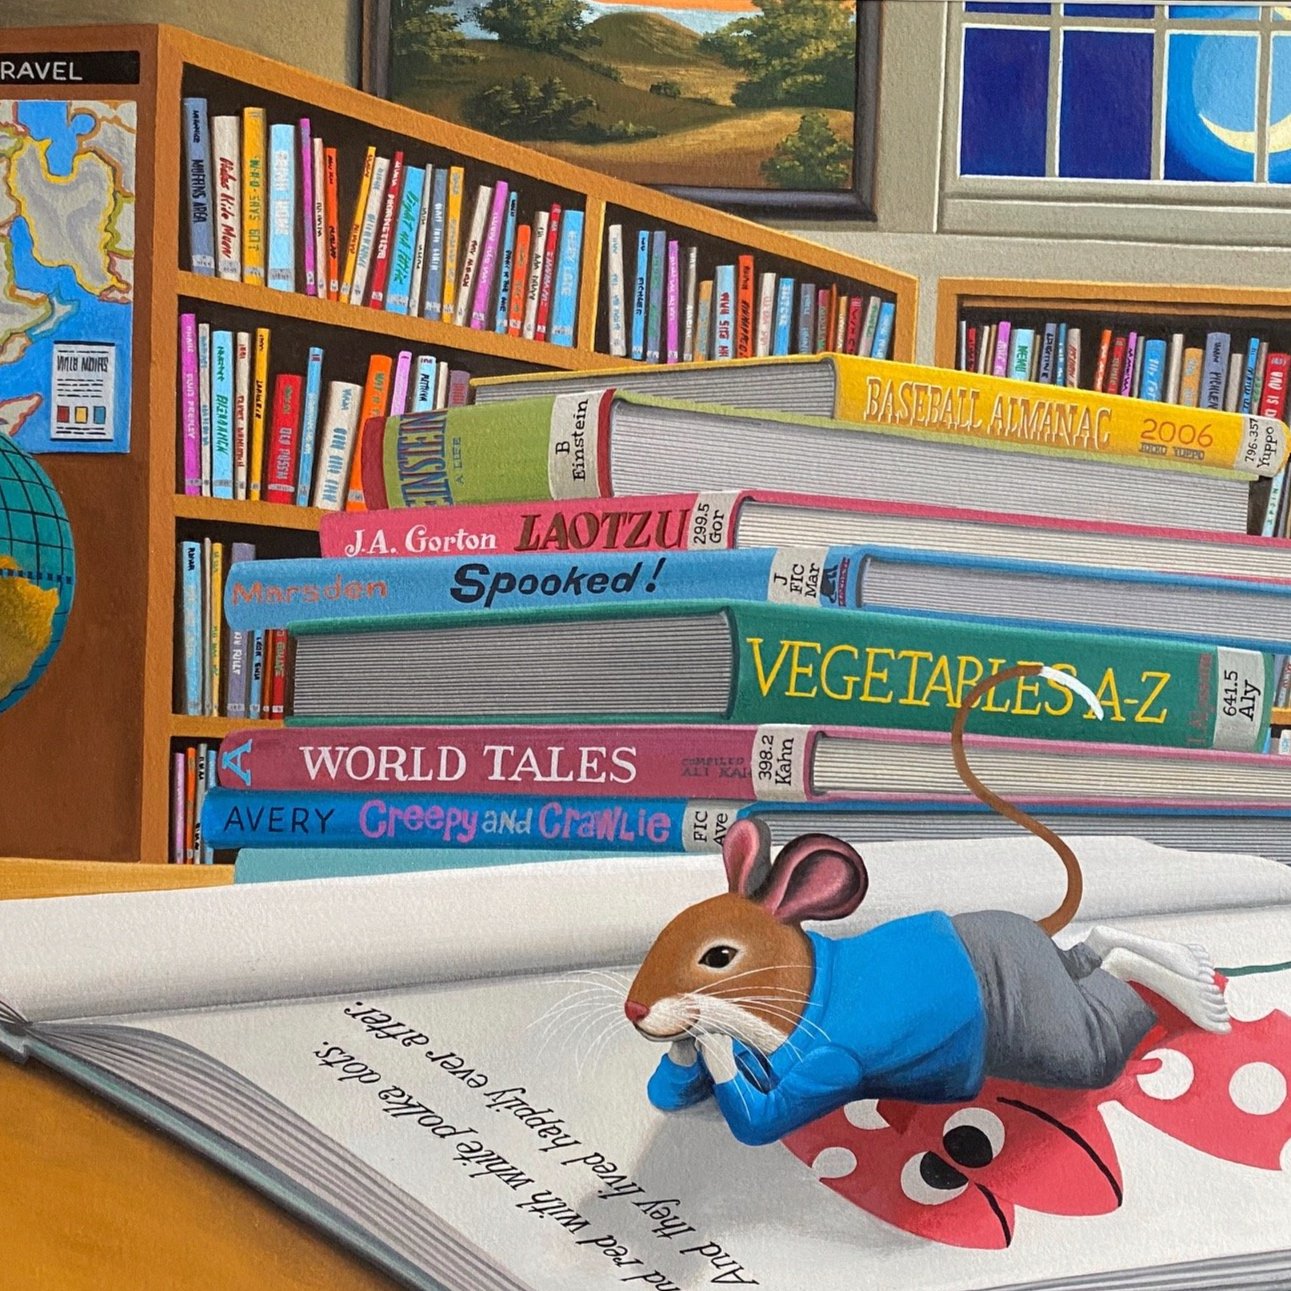 Library Mouse by Daniel Kirk